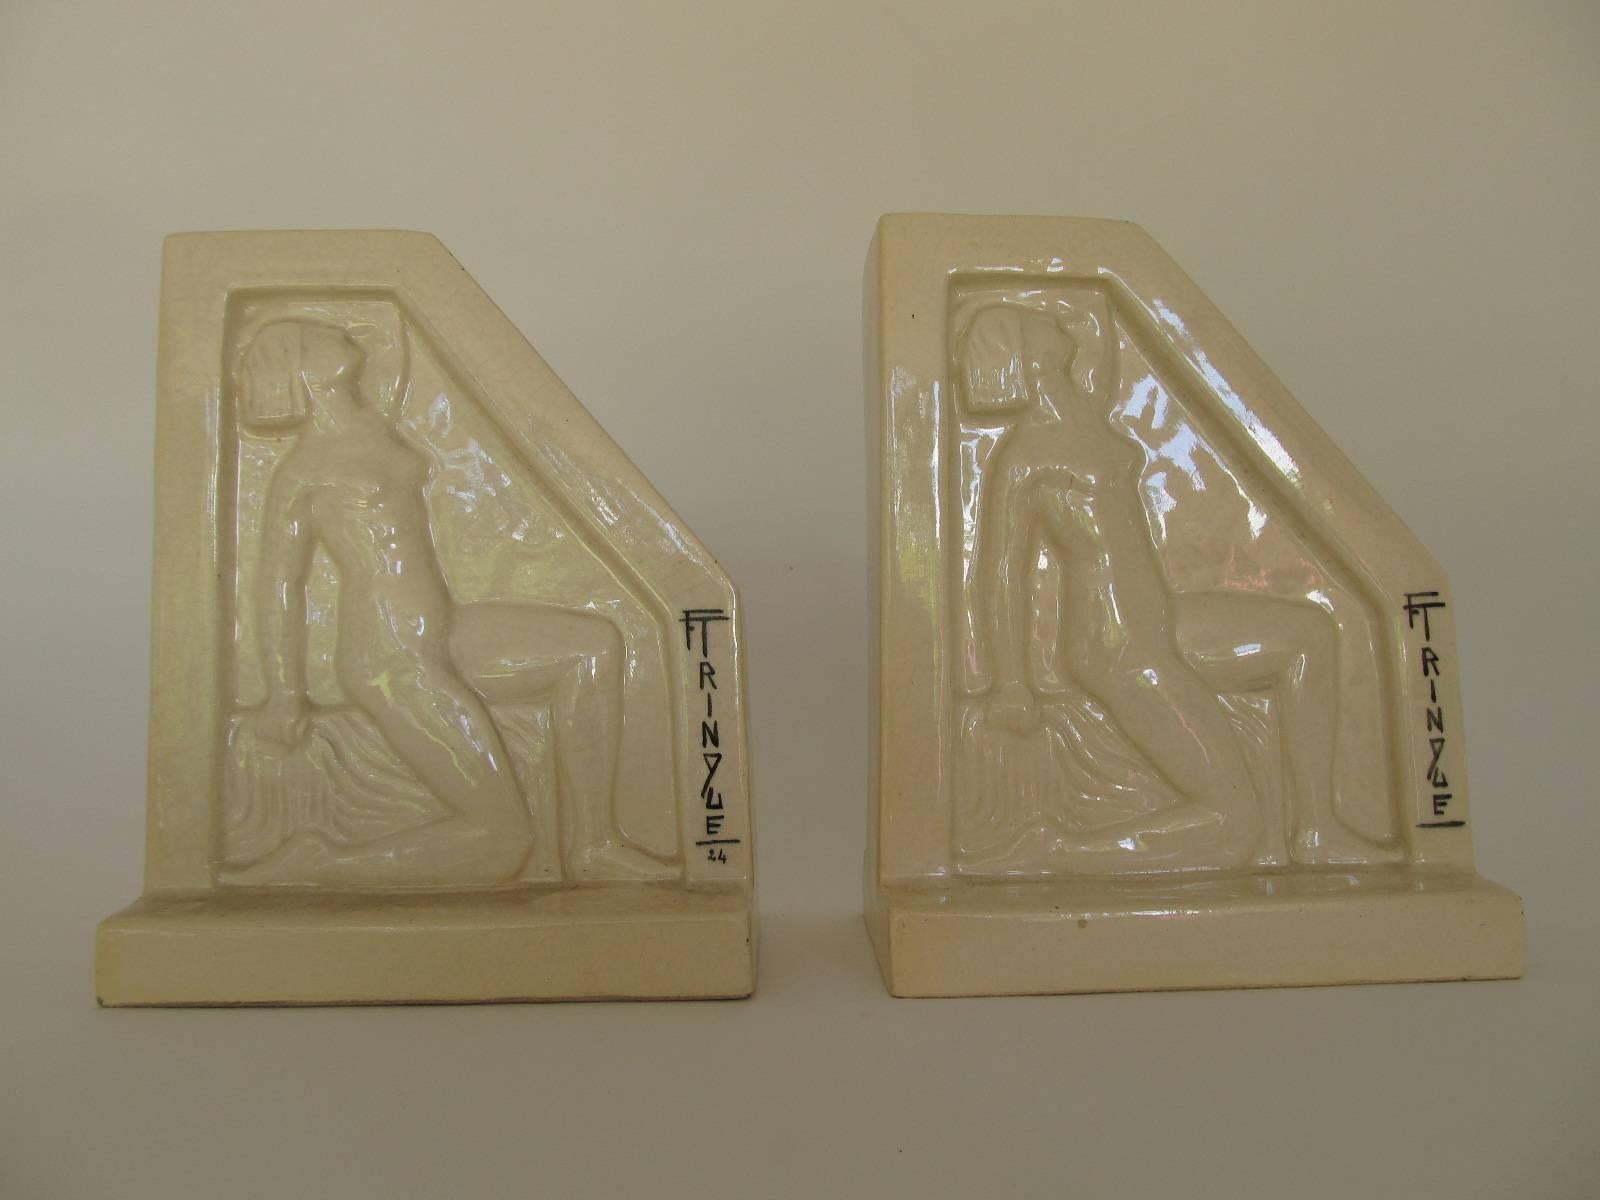 Early 20th Century 1924, French Art Deco Ceramic Bookends by F Trinque